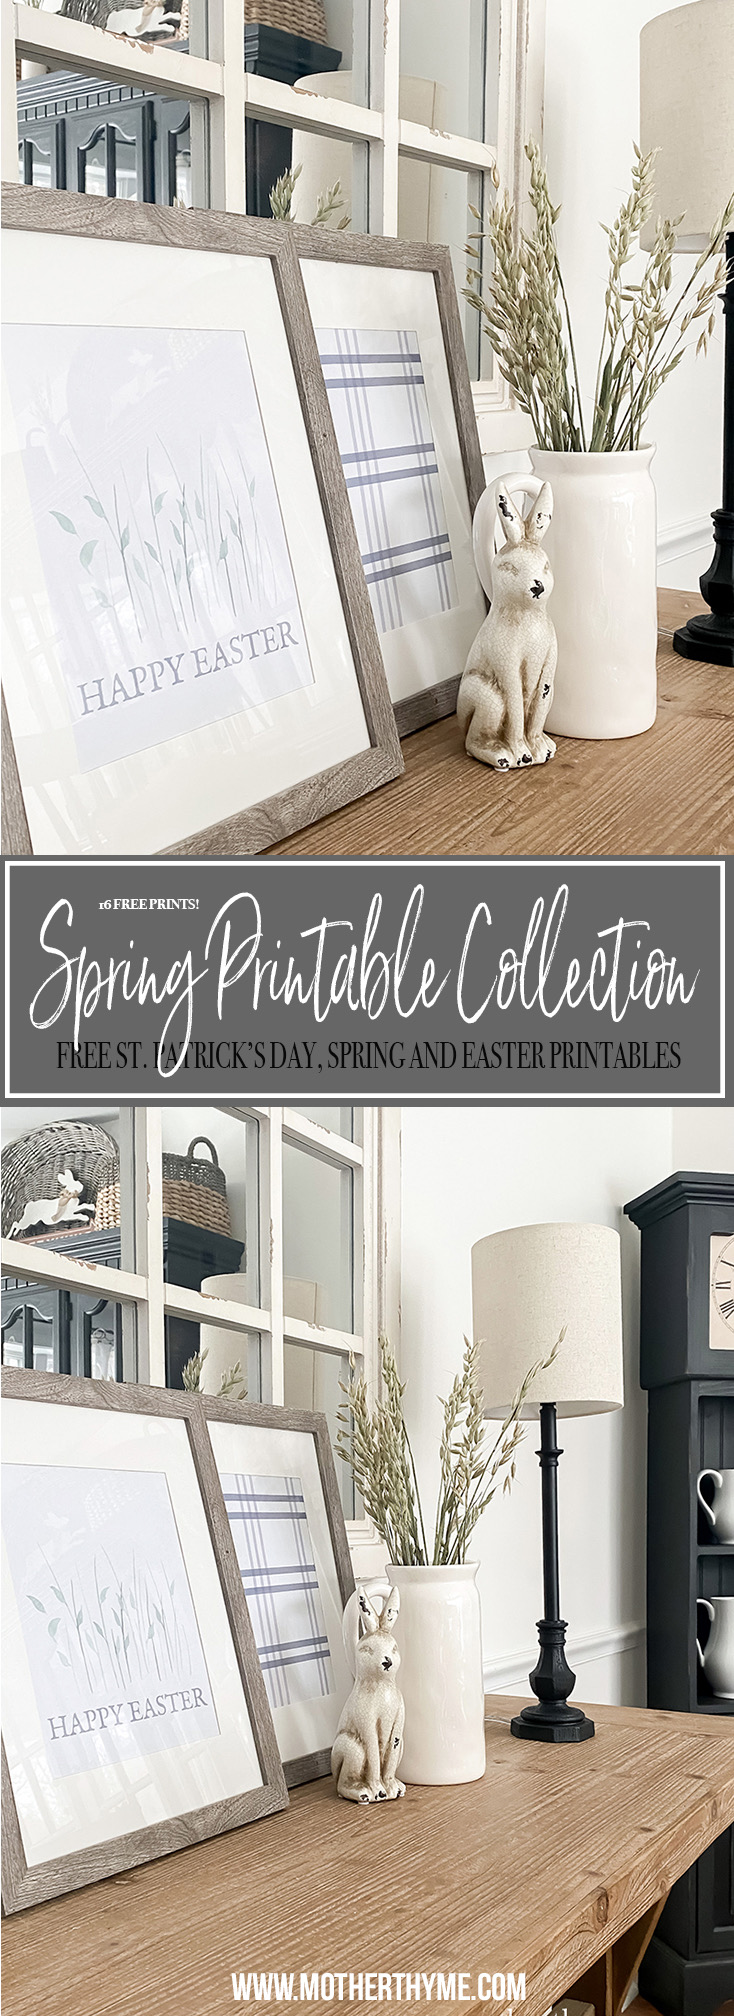 MARCH PRINTABLE COLLECTION - 16 FREE SPRING PRINTABLES!